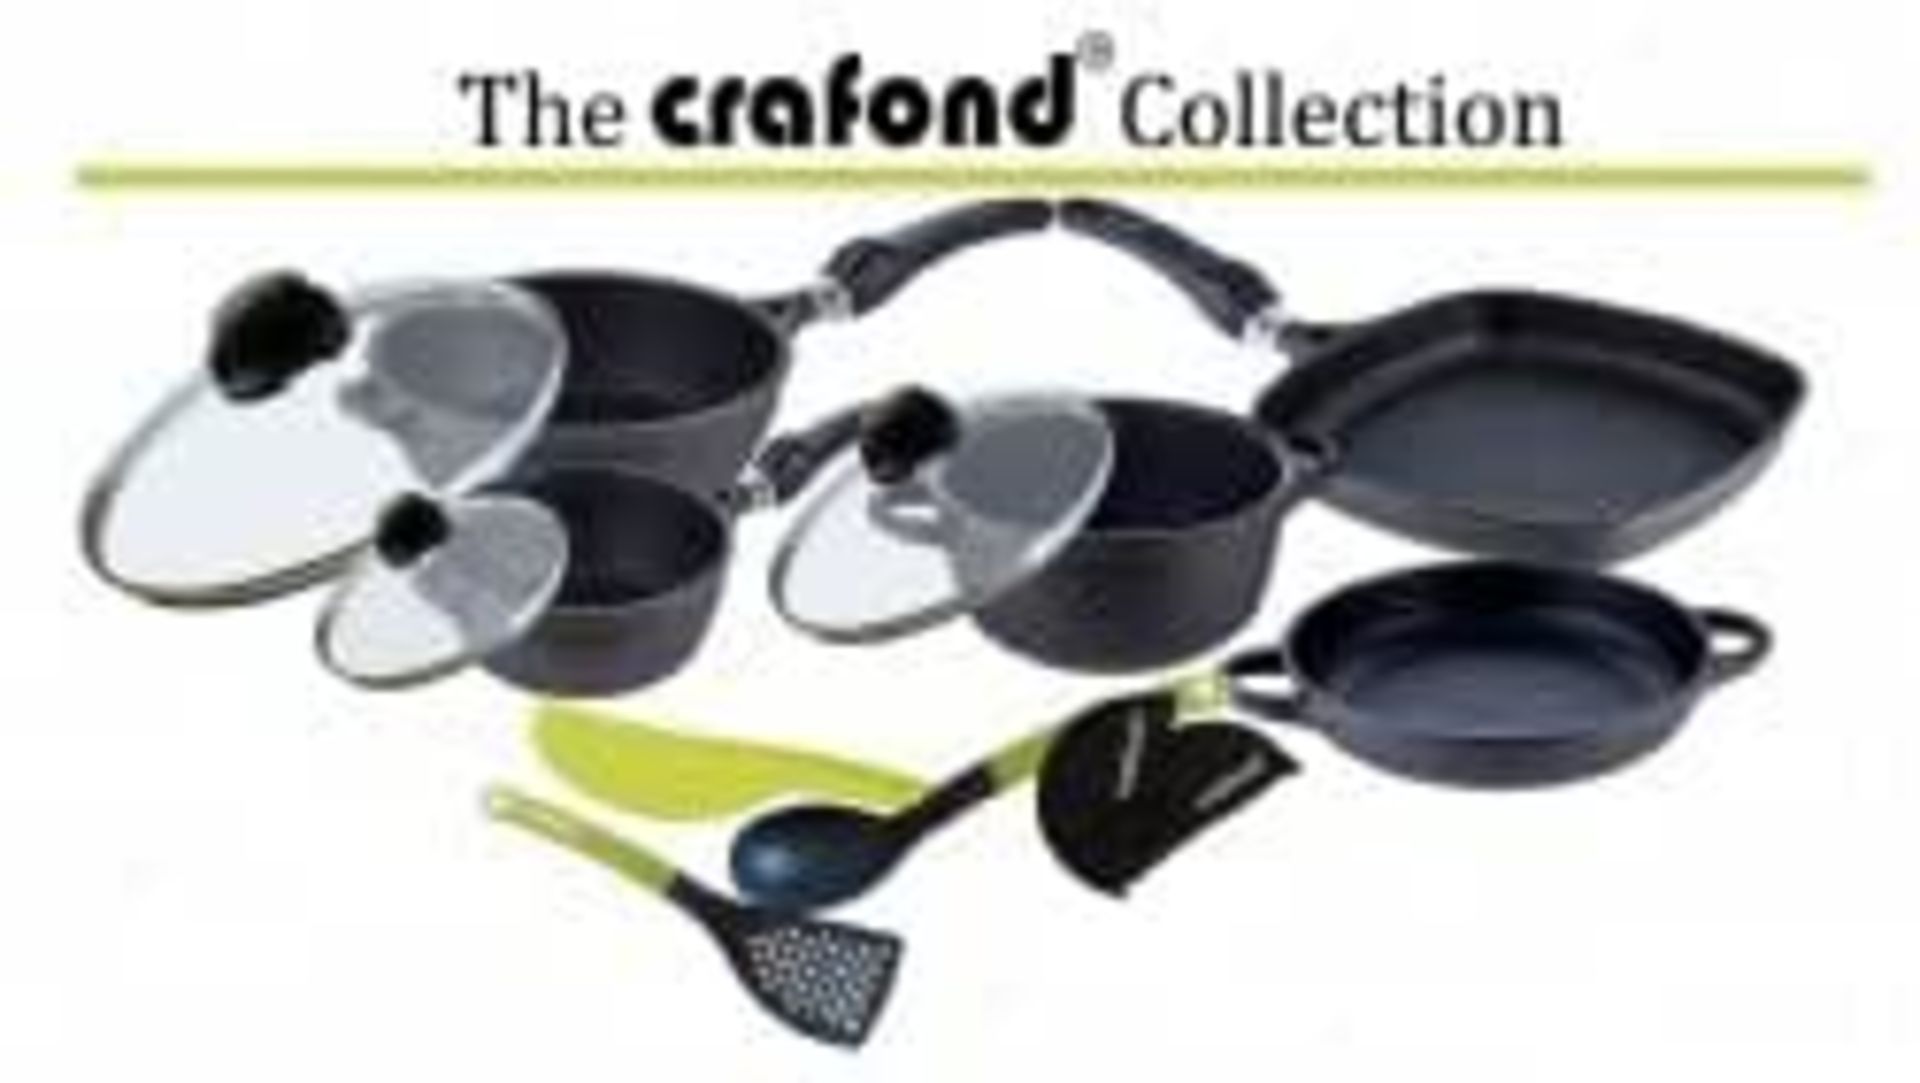 Crafond 28cm Saute Pan with detachable handle and lid - Image 2 of 5